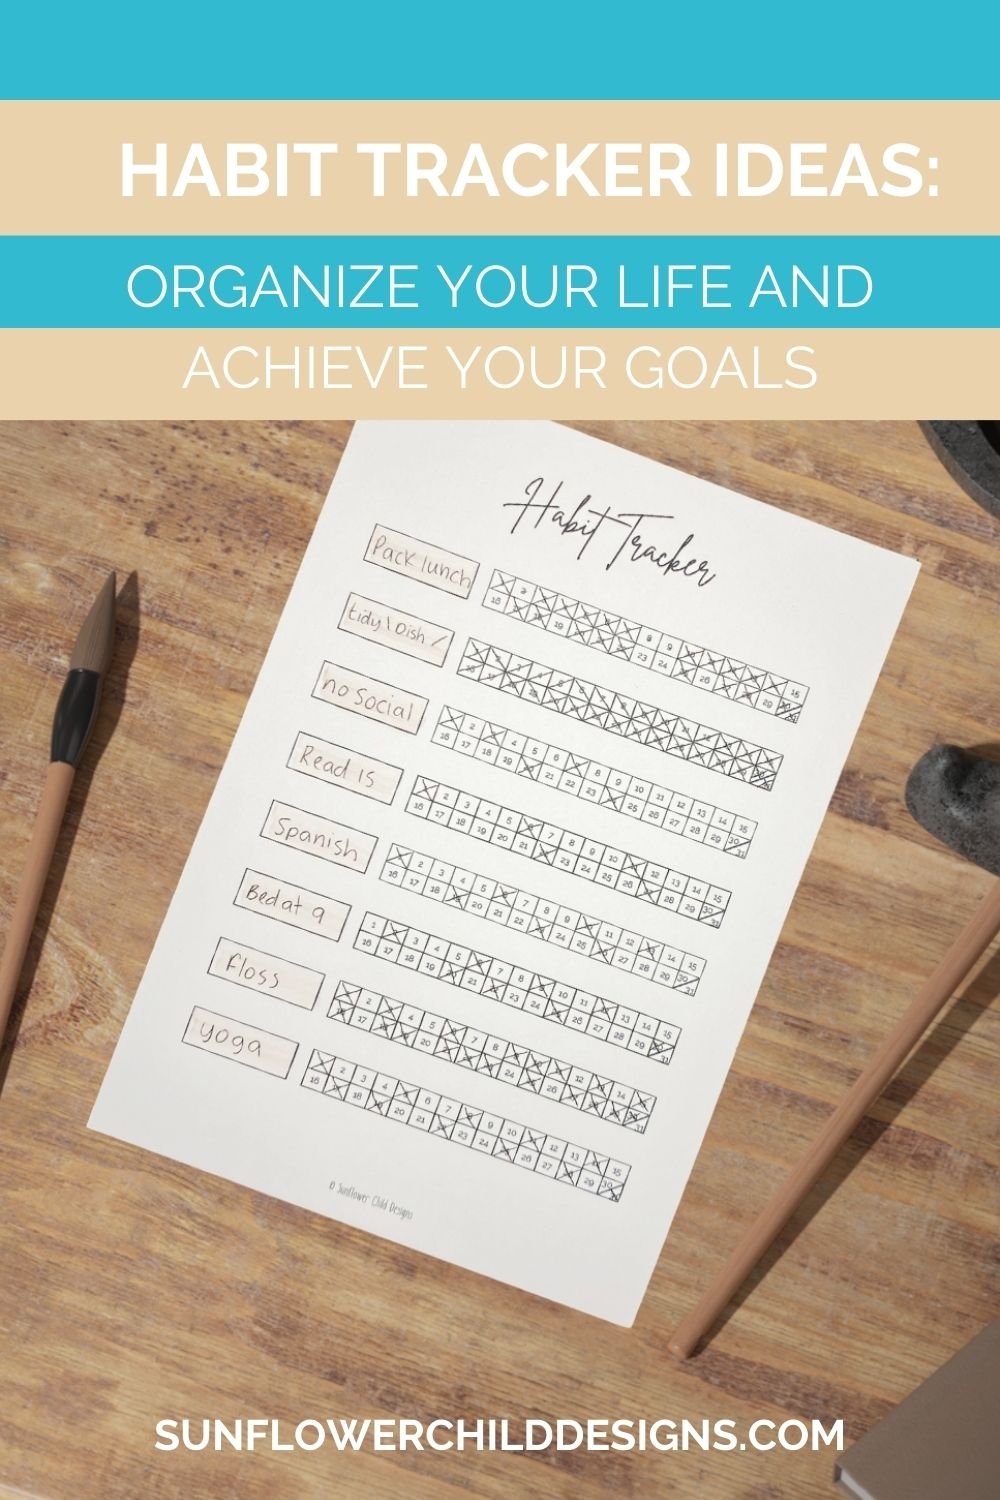 Habit Tracker Inspiration: Achieve Your Goals and Transform Your Life!